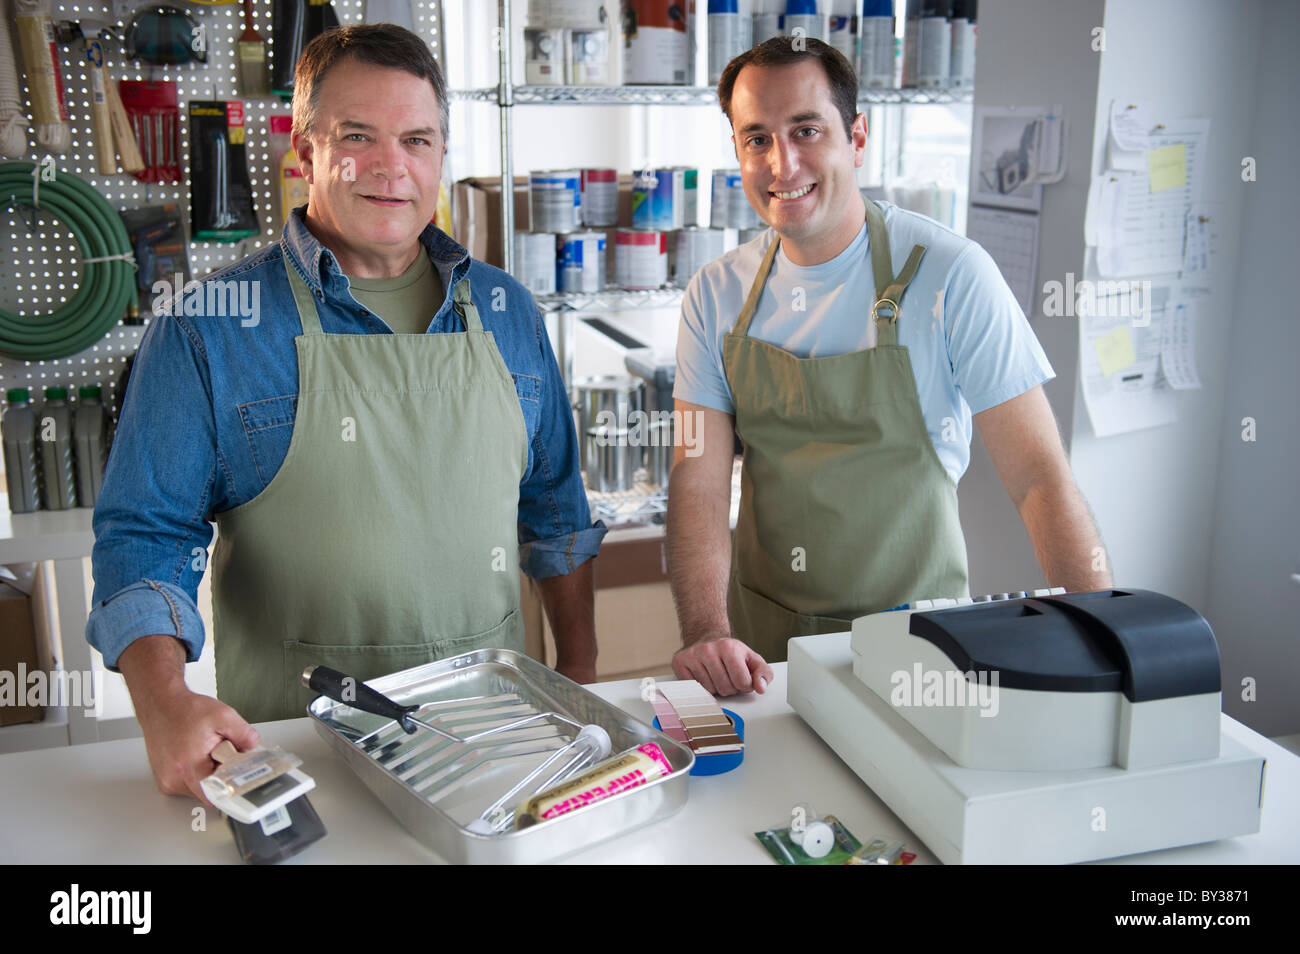 USA, New Jersey, Jersey City, Portrait of hardware shop owner and assistant Stock Photo